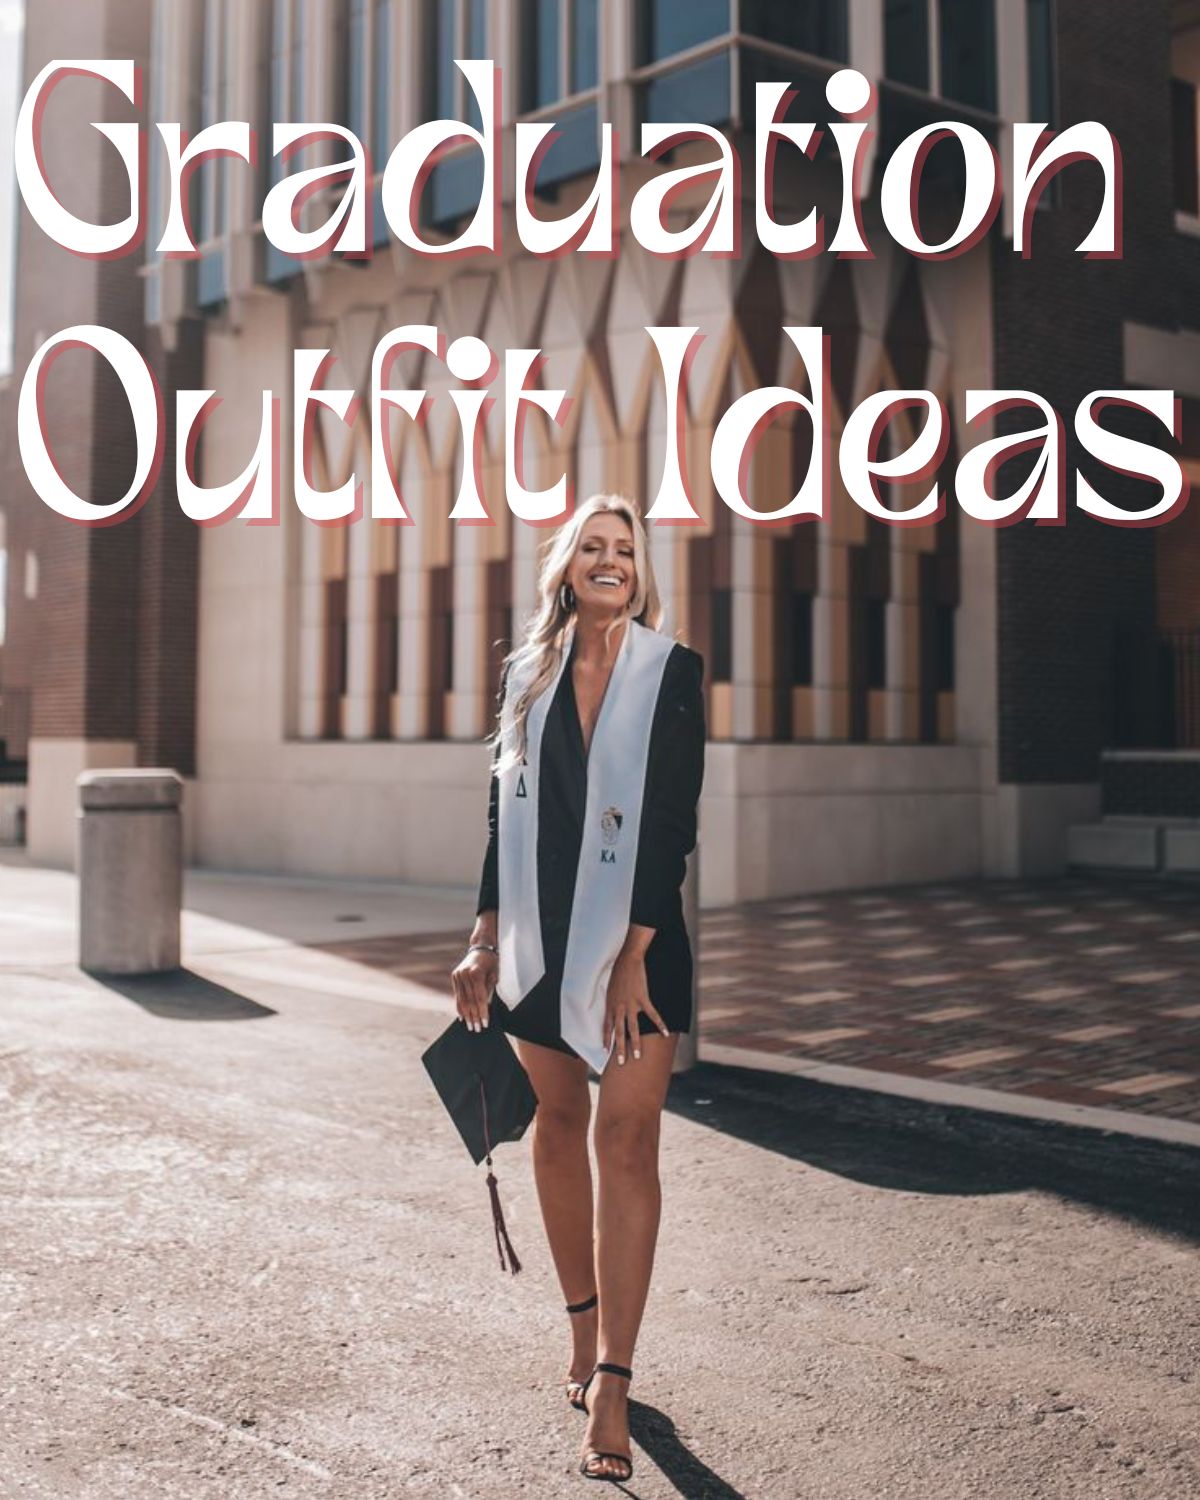 Girl wearing a stole and carrying a graduation cap